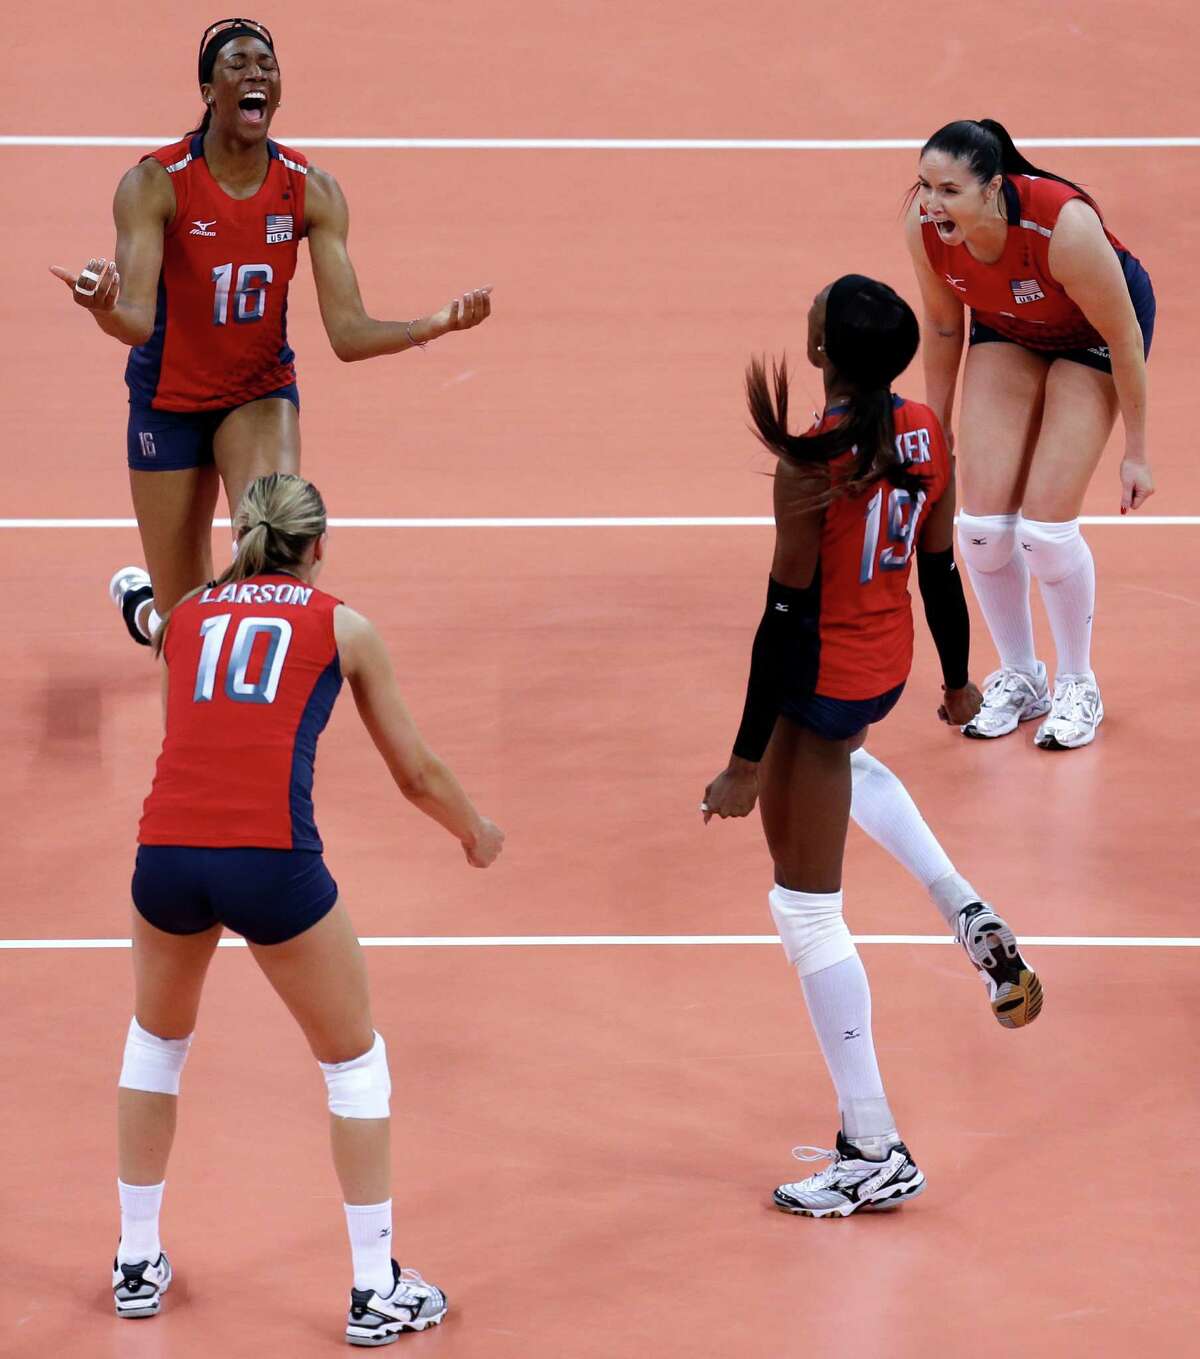 Members of team United States, clockwise from top left, Foluke Akinradewo, Lindsey Berg, Destinee Hooker and Jordan Larson celebrate after defeating South Korea in a women's semifinal volleyball match at the 2012 Summer Olympics, Thursday, Aug. 9, 2012, in London. (AP Photo/Jeff Roberson)